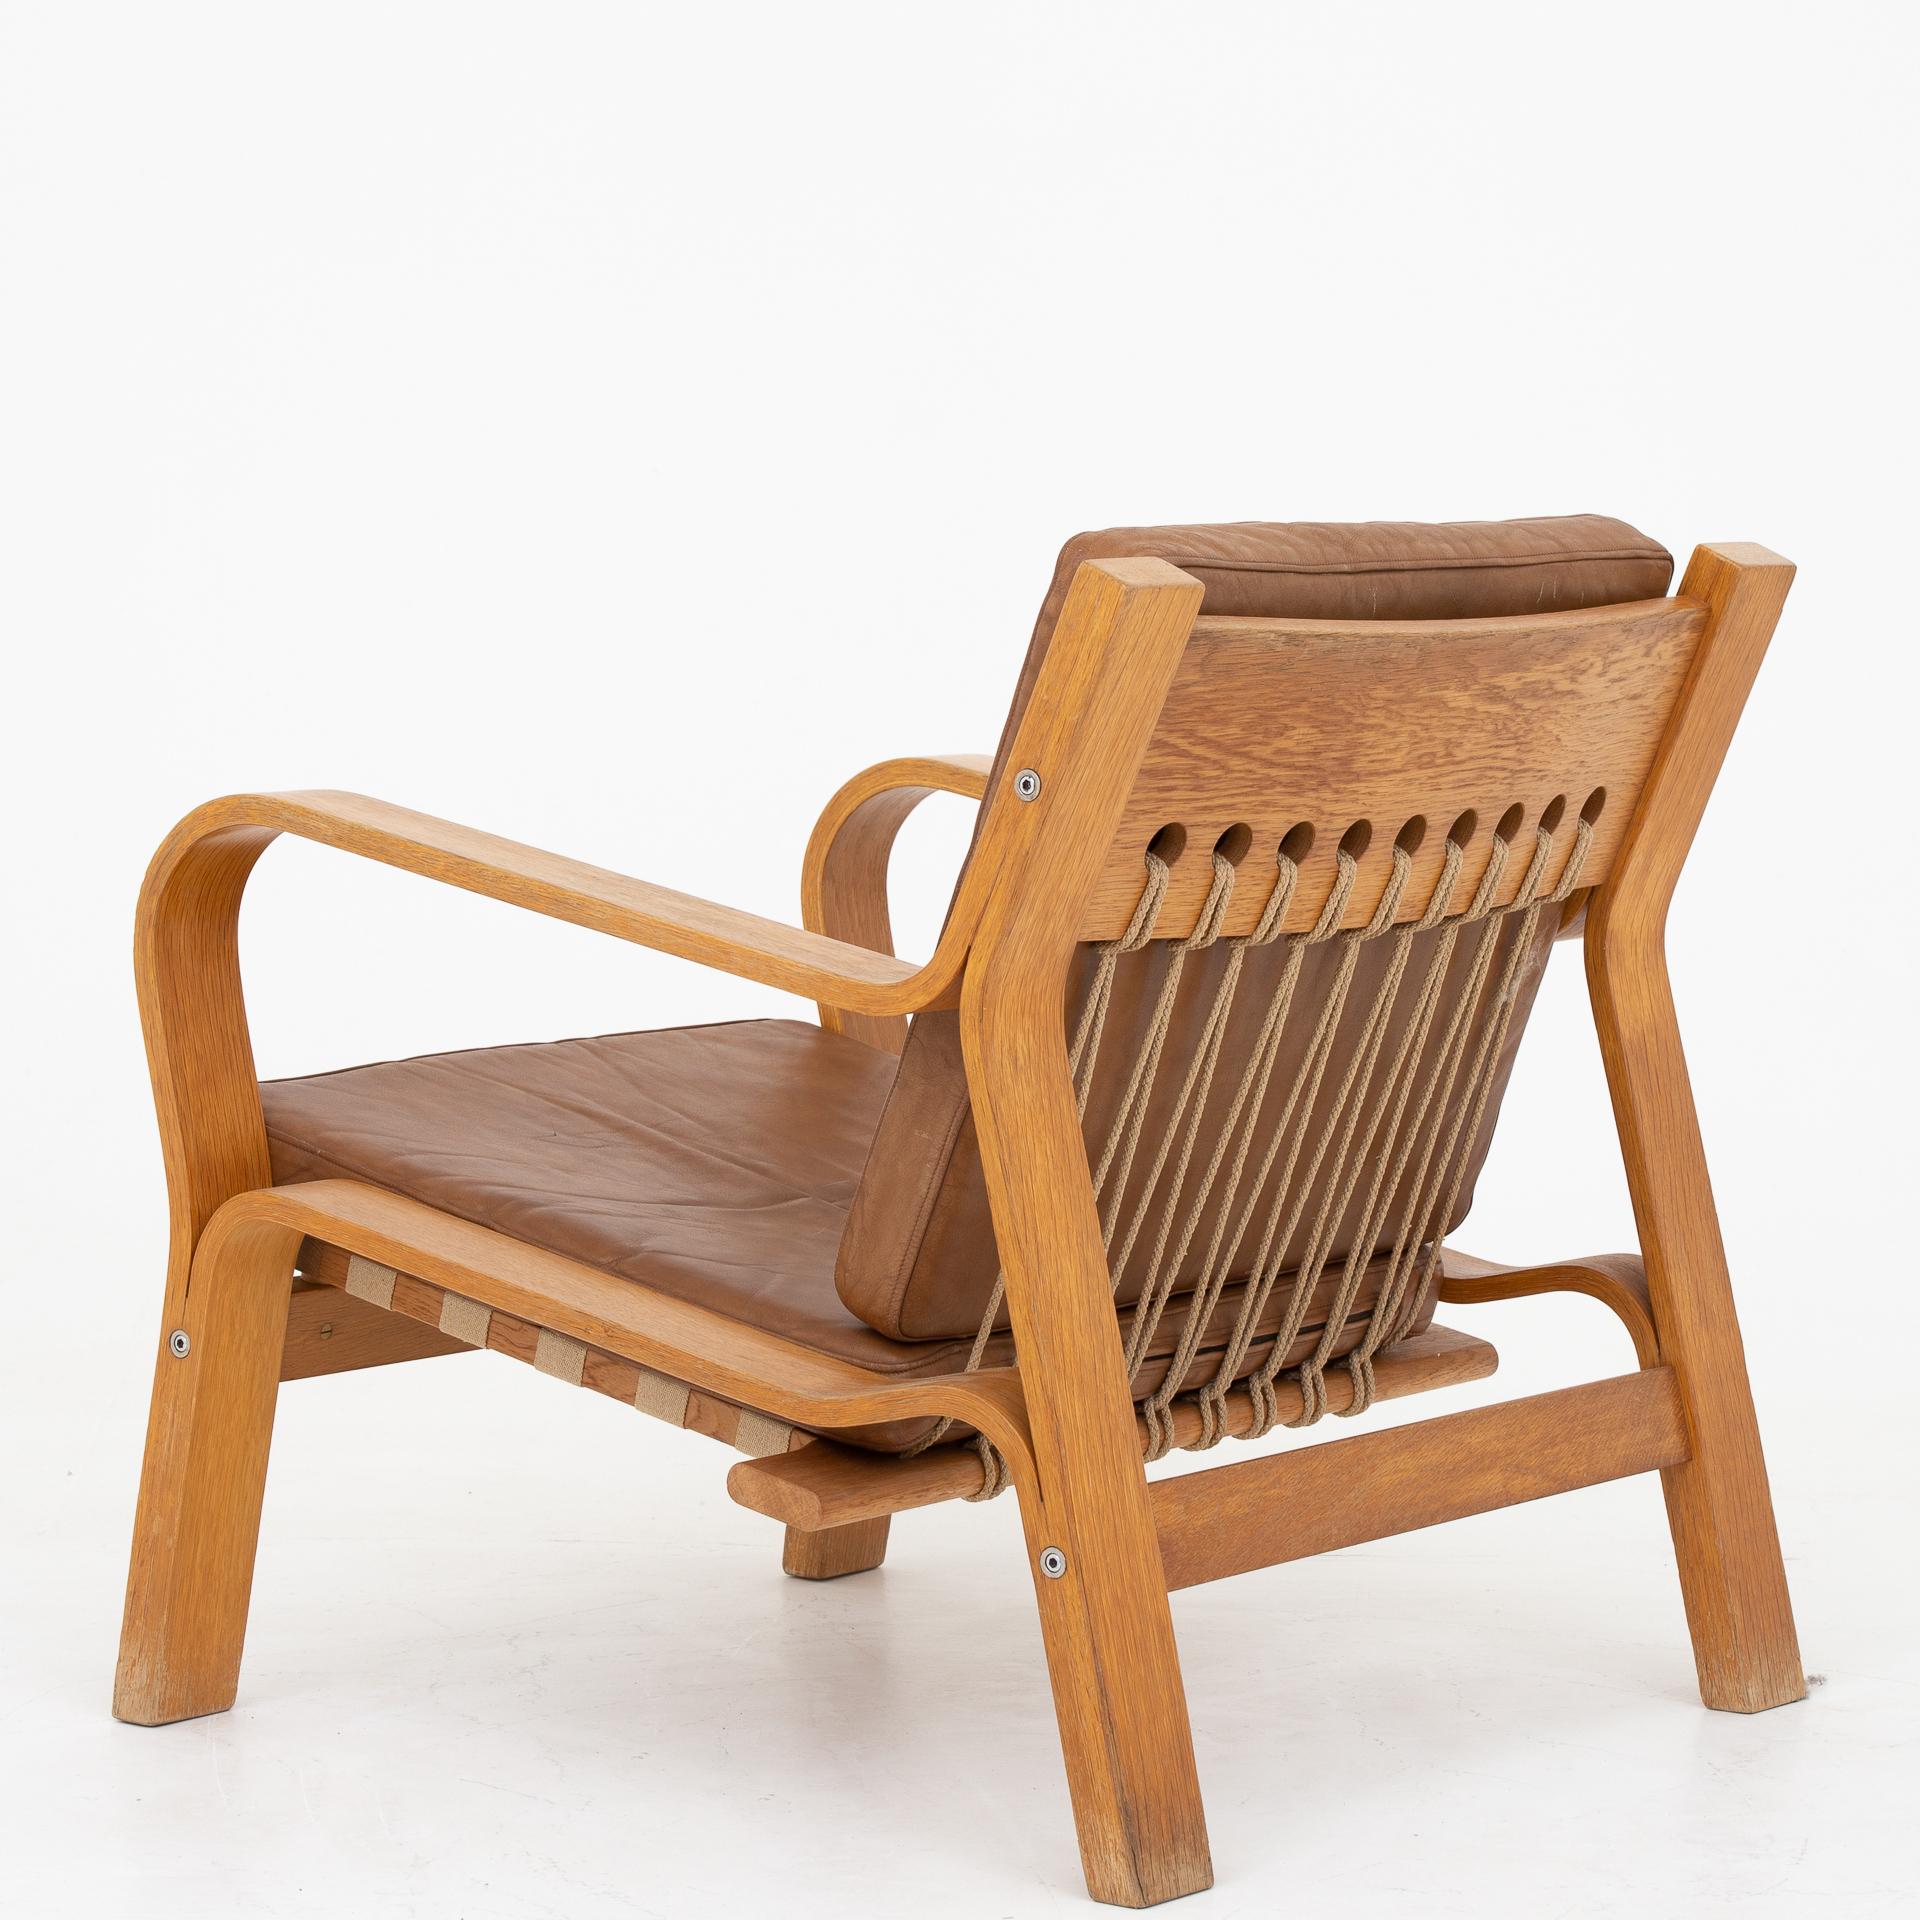 GE 671 - Easy chair in oak and flag halyard with cushions in brown leather. Maker GETAMA.